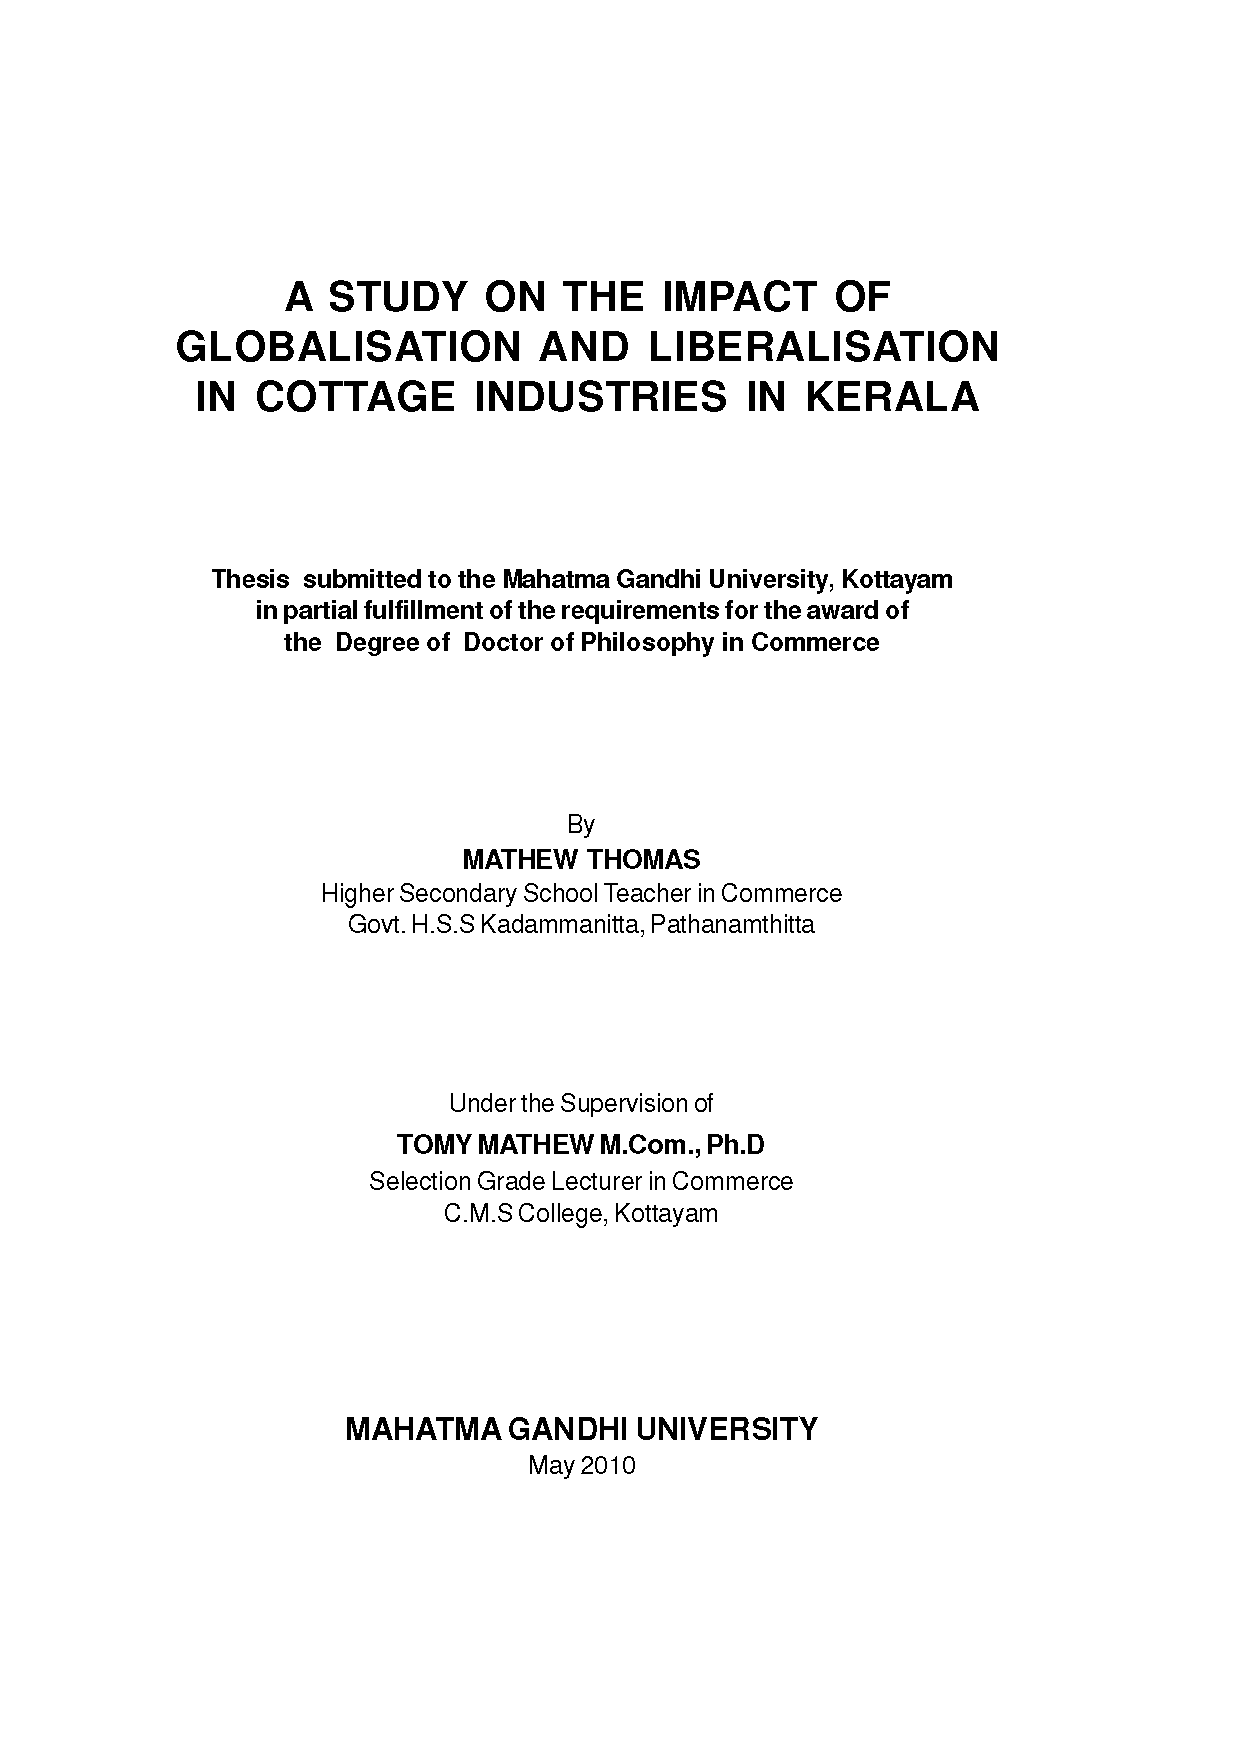 Phd thesis on small scale industries in india